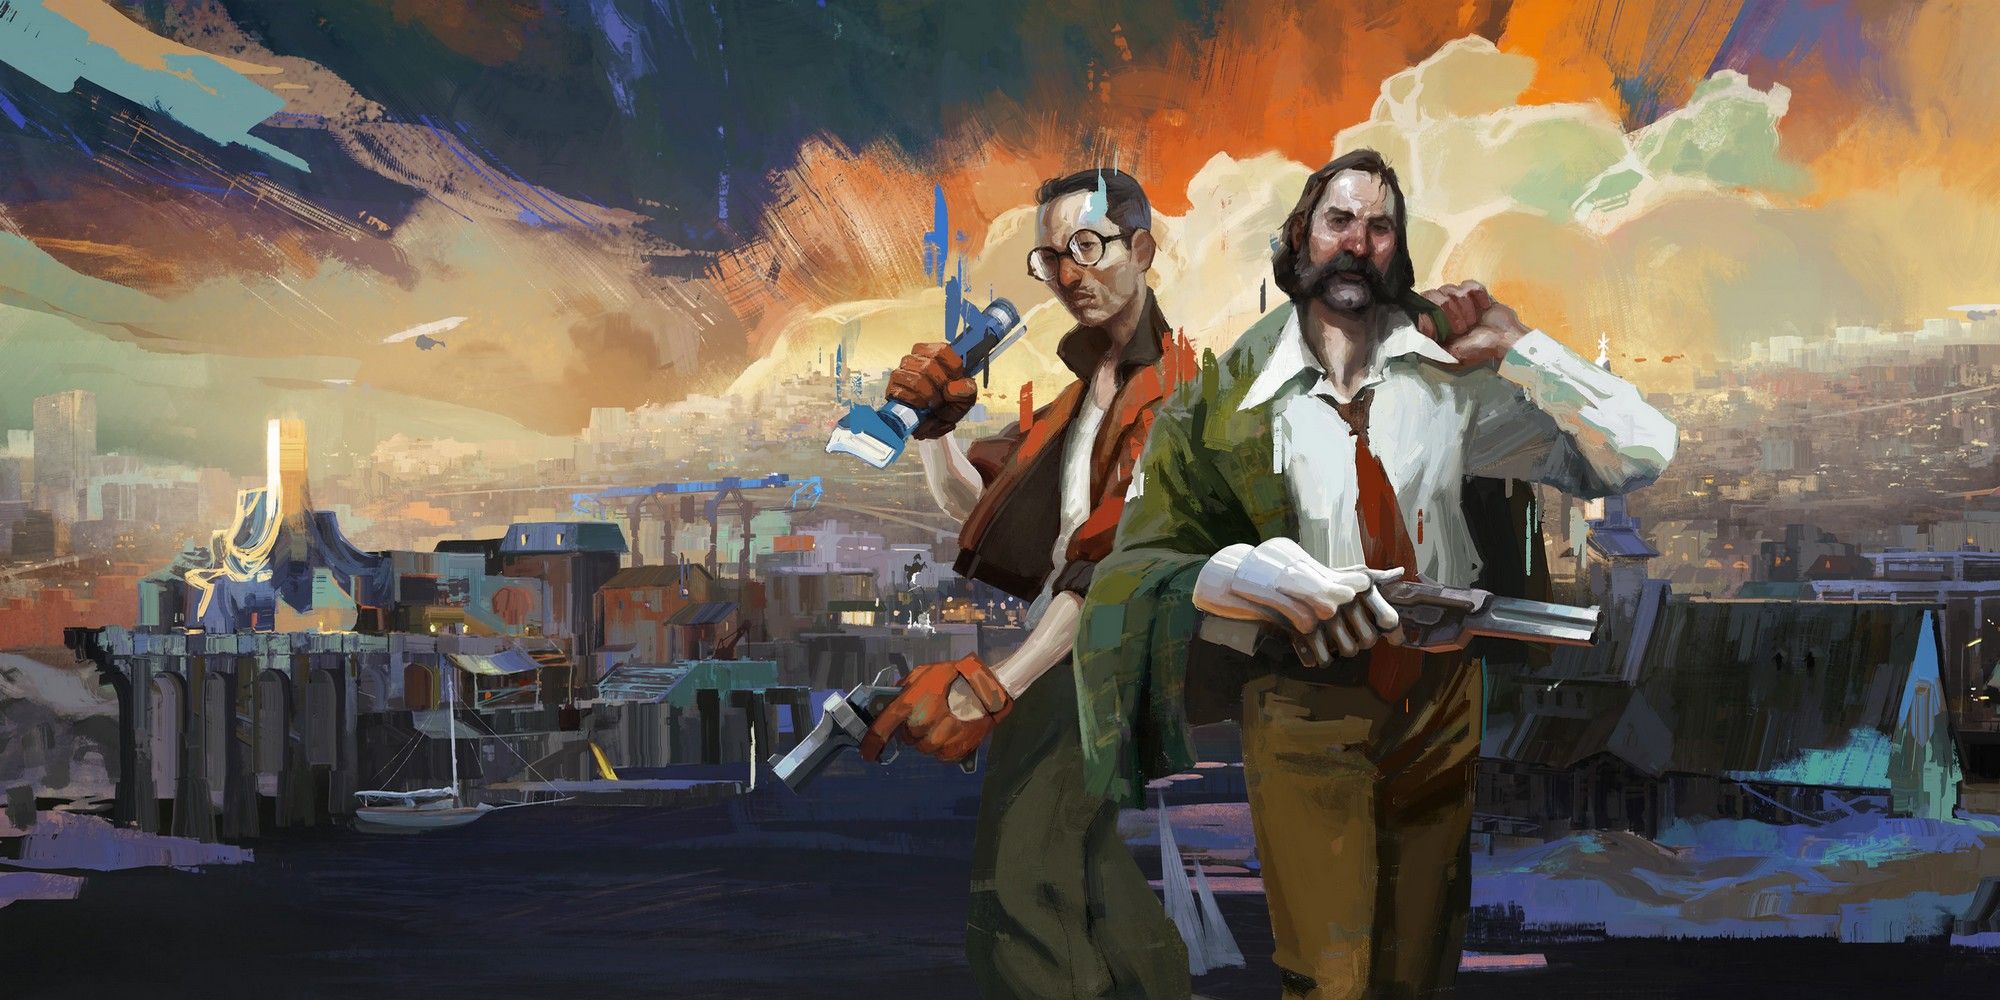 Disco Elysium Harry the characters against the city